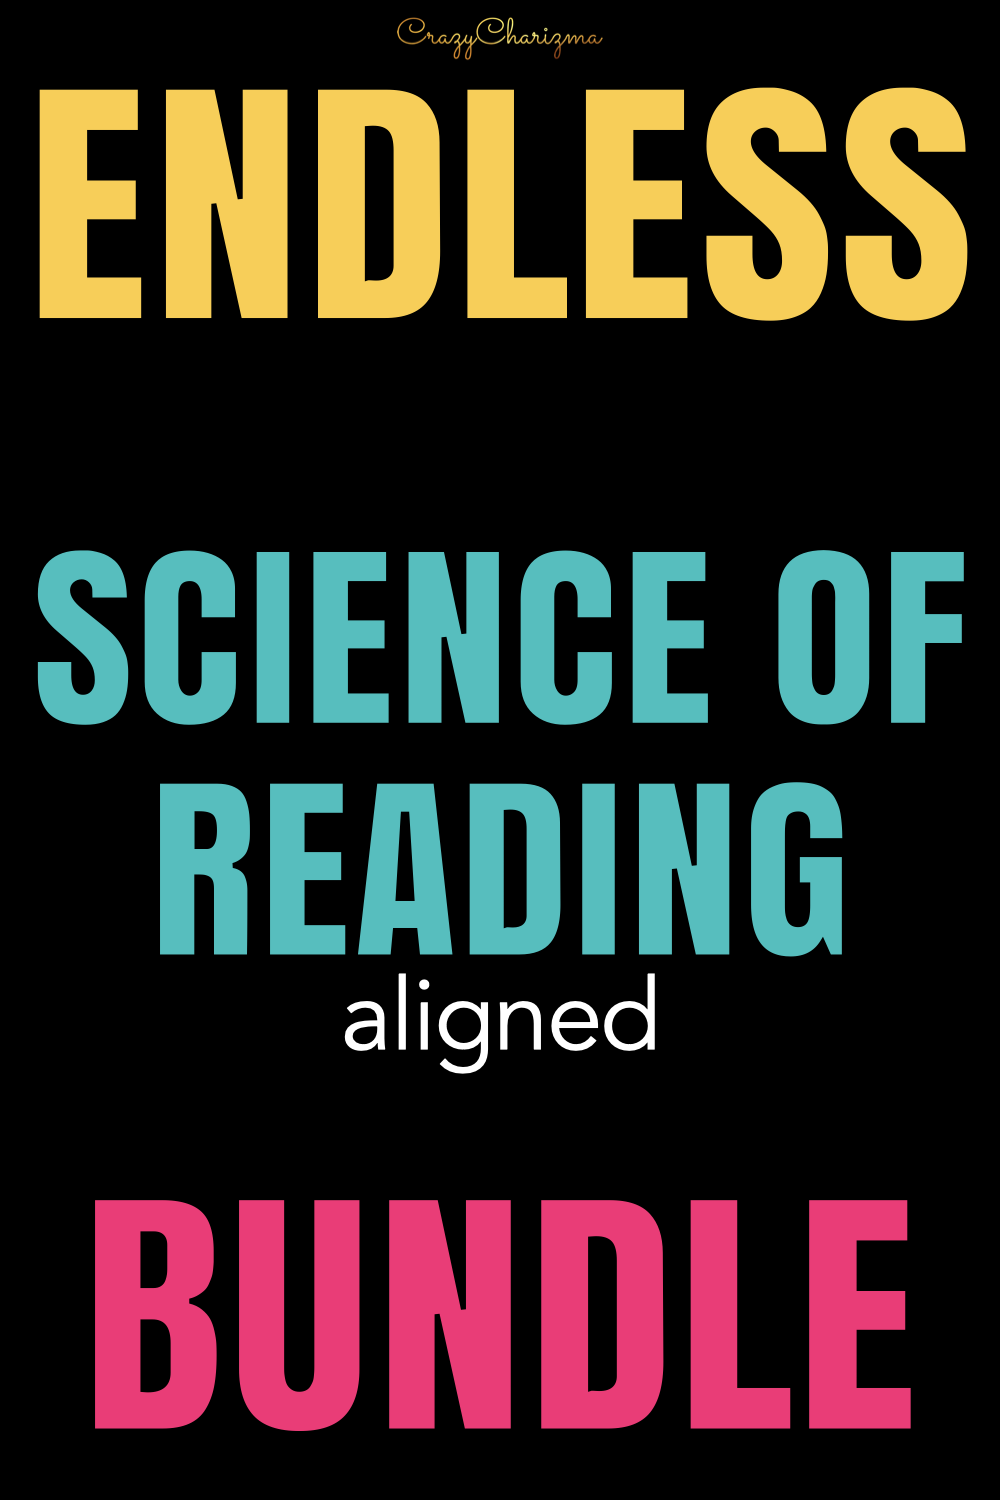 Science of Reading is a hot topic these days. You could have had a PD but still don’t know what resources to use. Take advantage of this ENDLESS BUNDLE! Buy it now and get future sets for free.